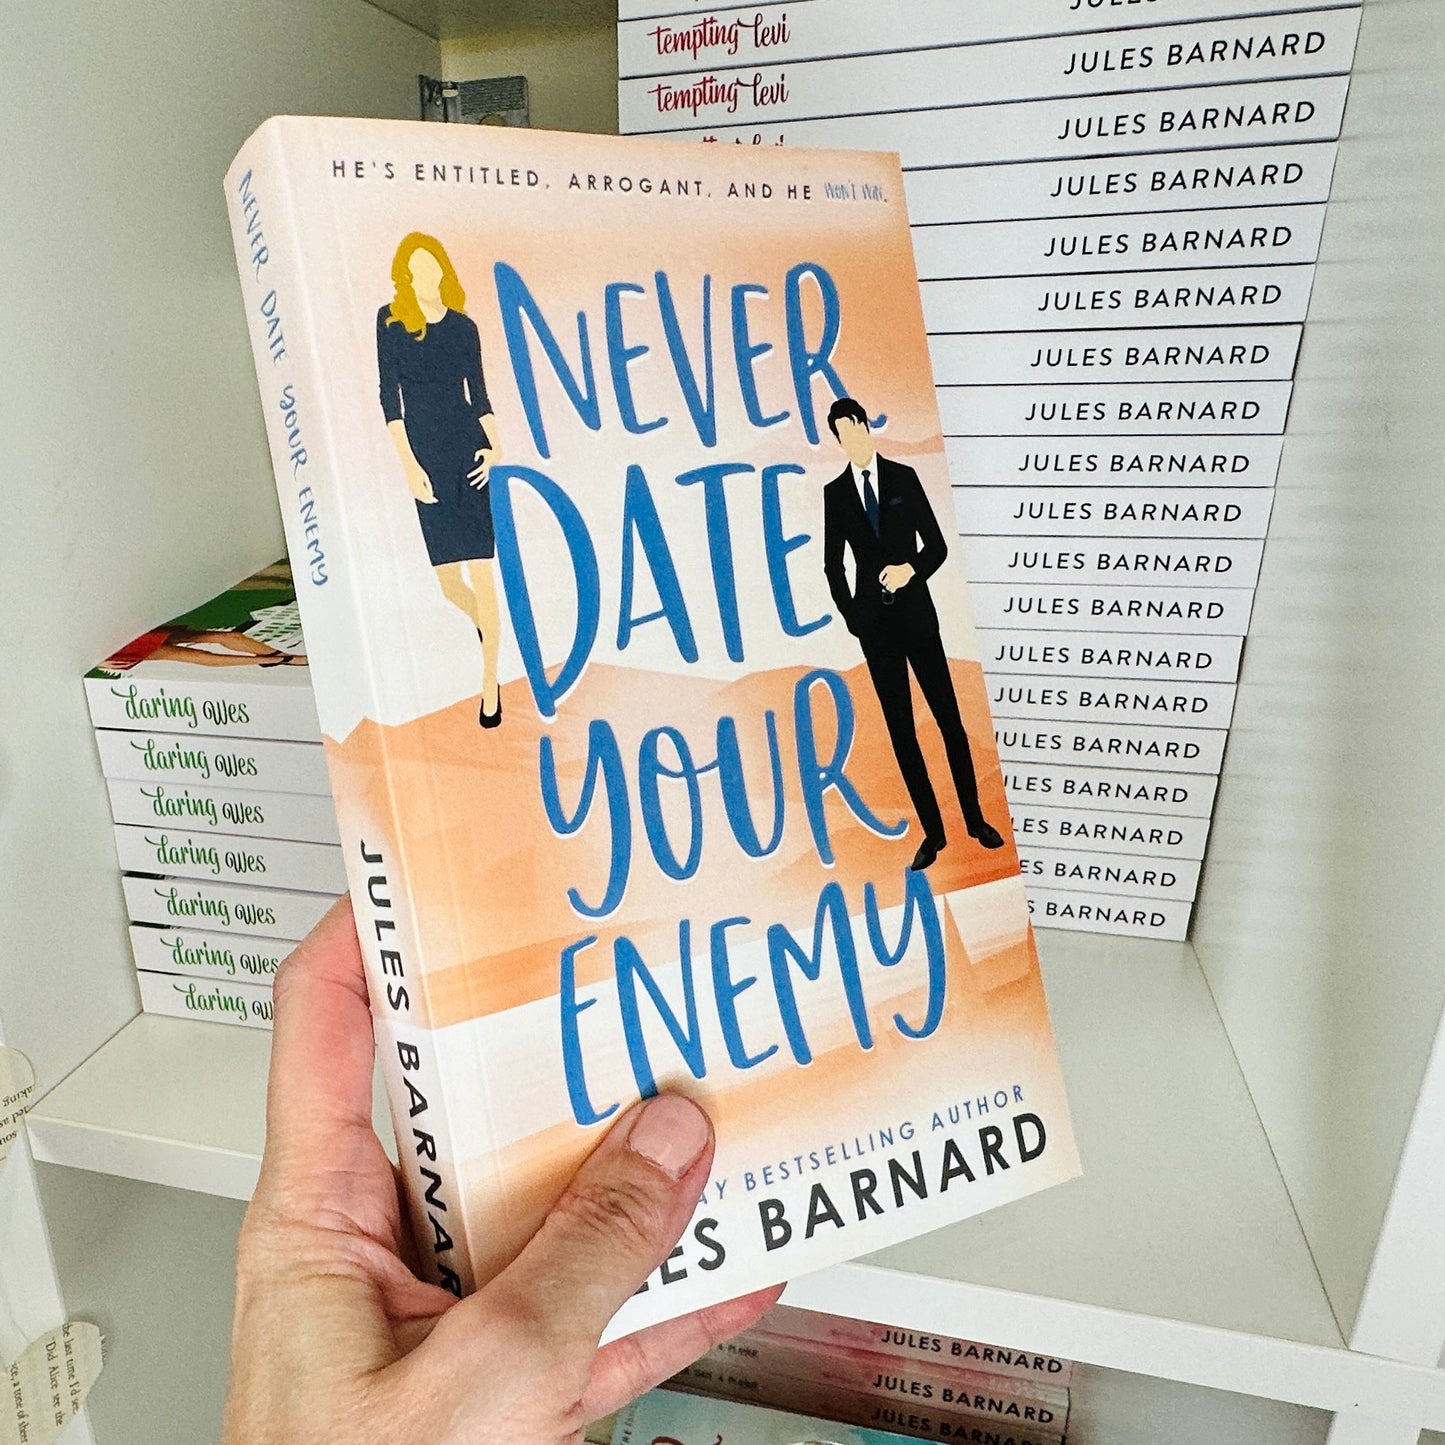 Never Date Your Enemy -- Rom-Com Paperback